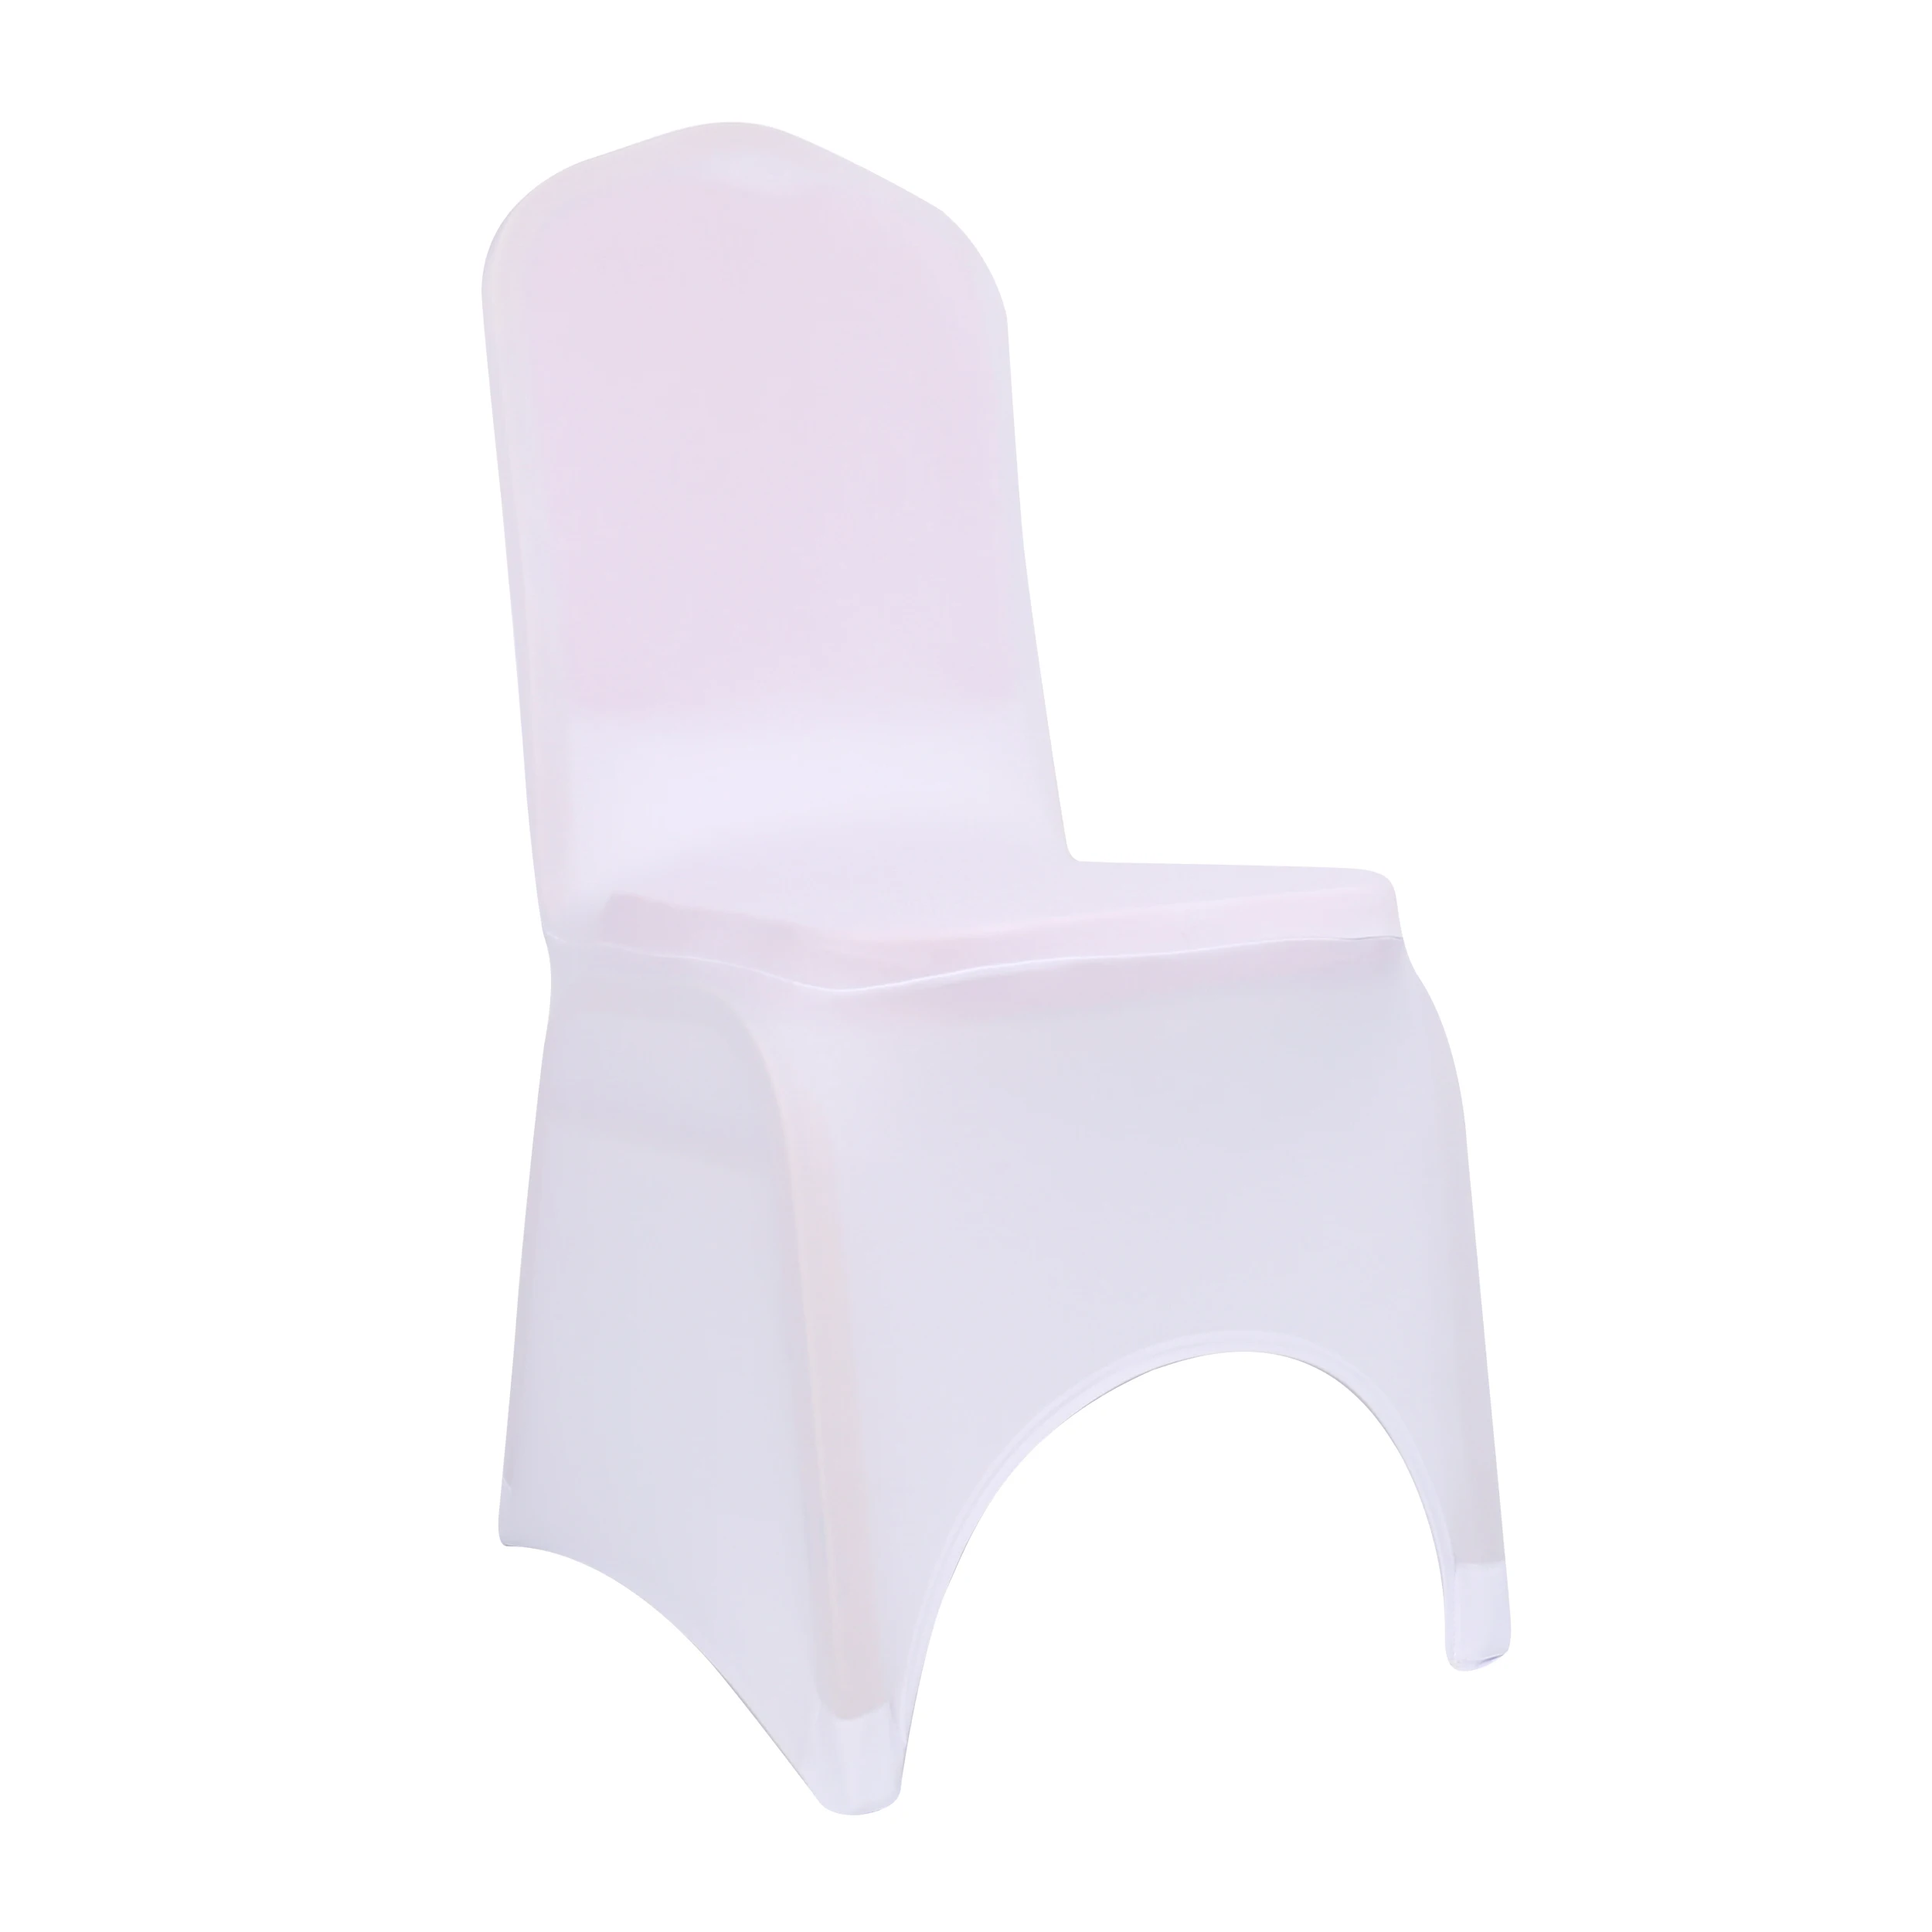 Cheap Stretch Spandex White Chair Covers for for Hotels Restaurants Wedding Banquet Party